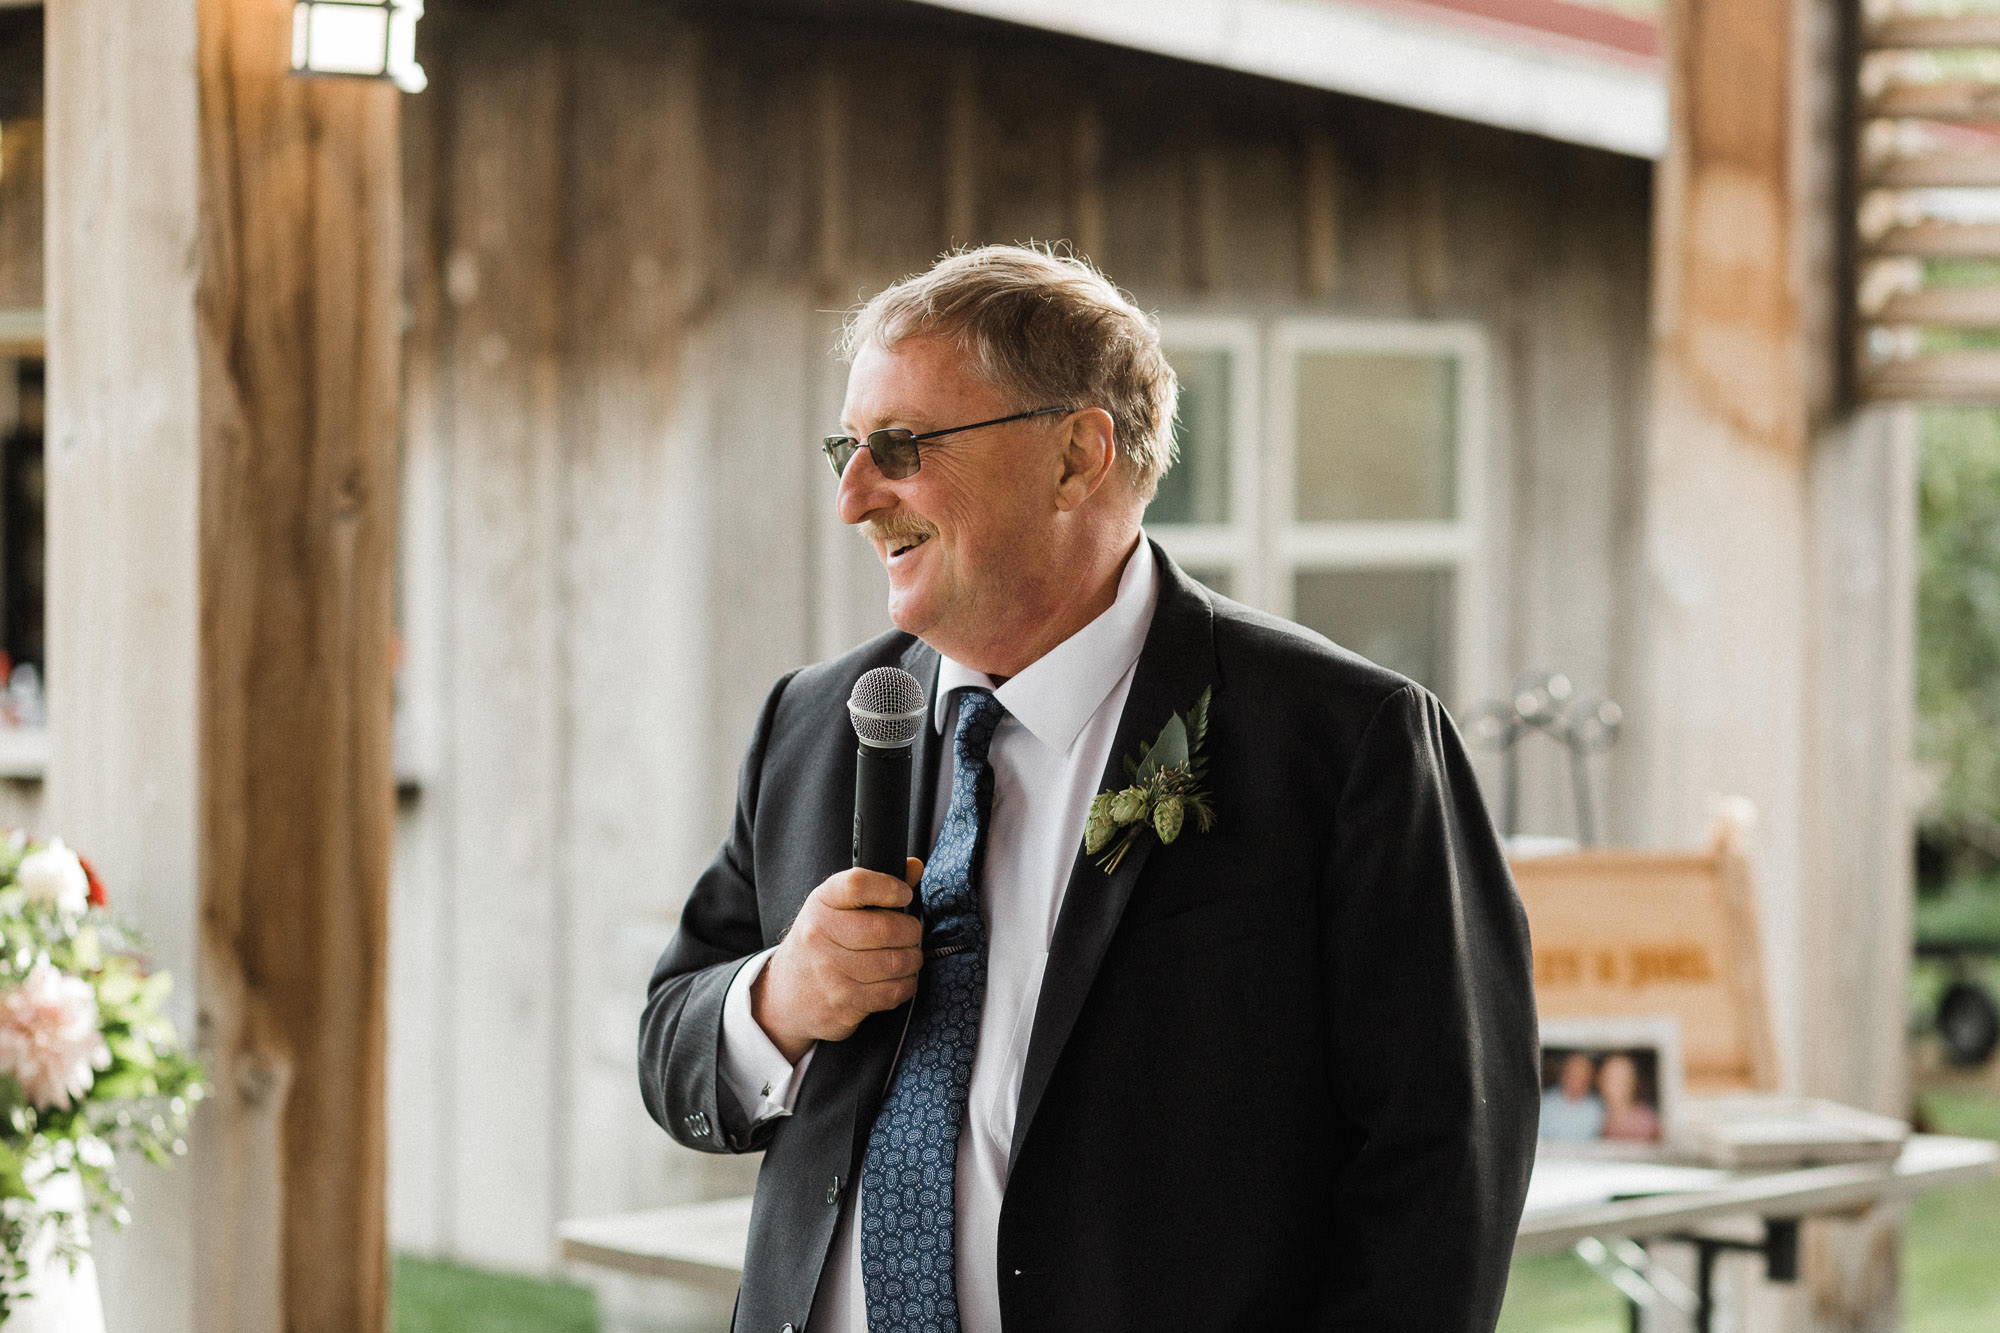 The father of the bride gives a toast at Mt. View Orchards.